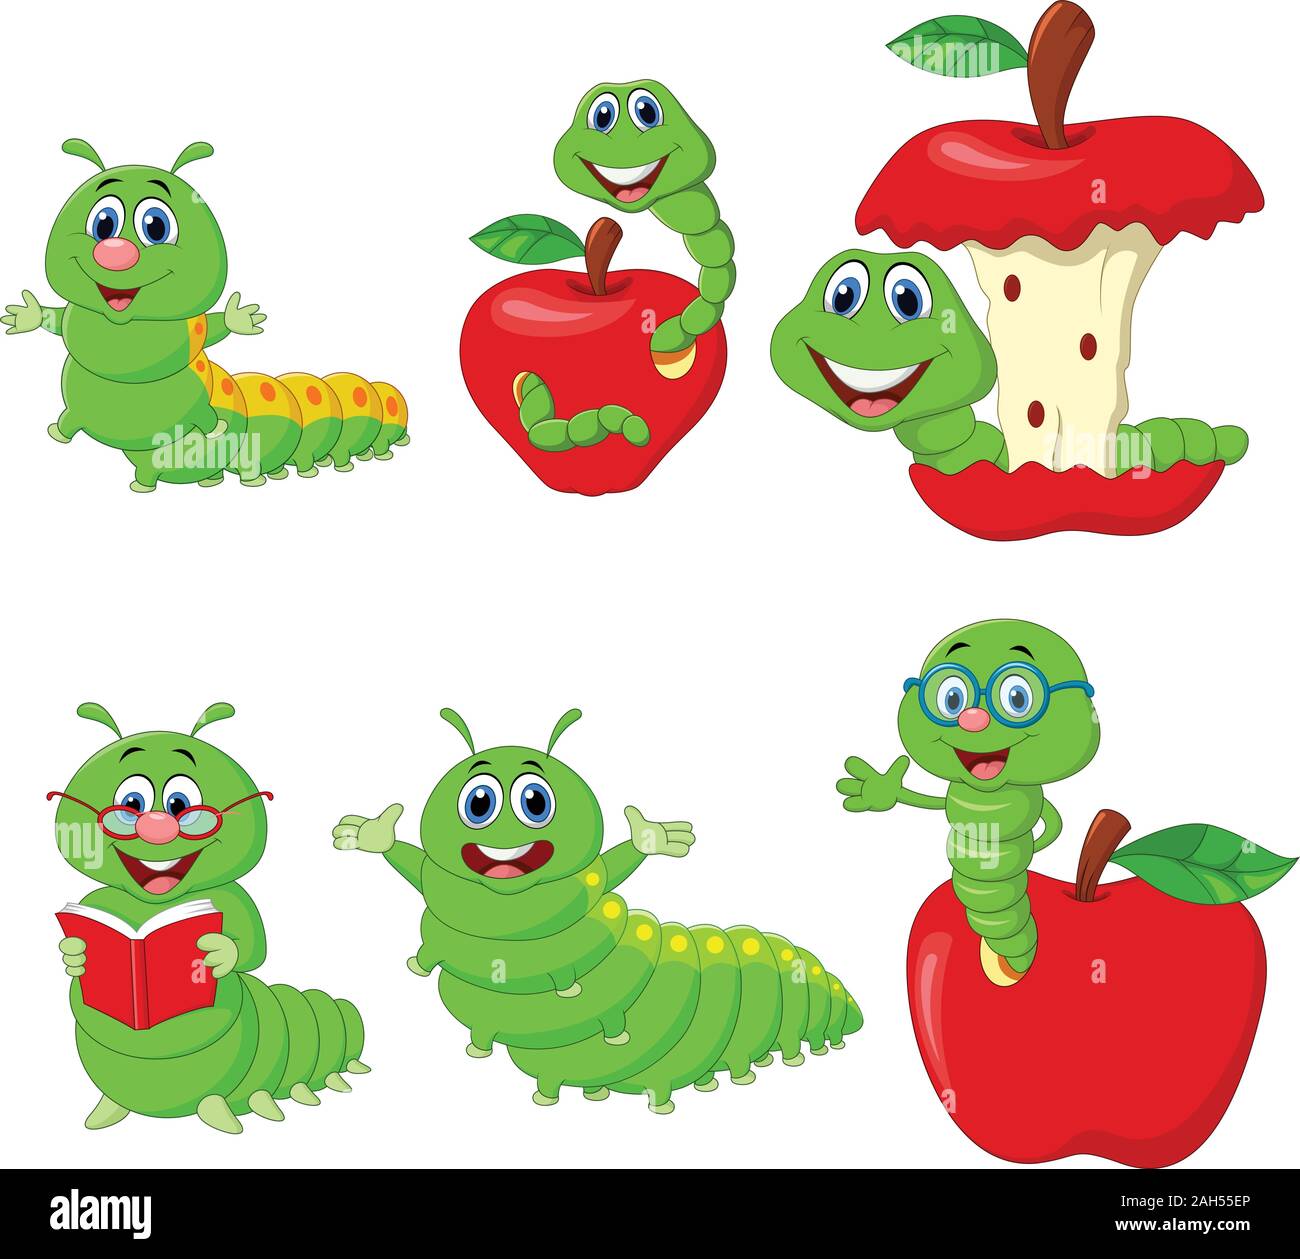 Earthworm Set. Worm Insect Icon. Cartoon Funny Kawaii Baby Animal  Character. Cute Crawling Bug Collection. Smiling Face Stock Vector -  Illustration of caterpillar, insect: 299017671